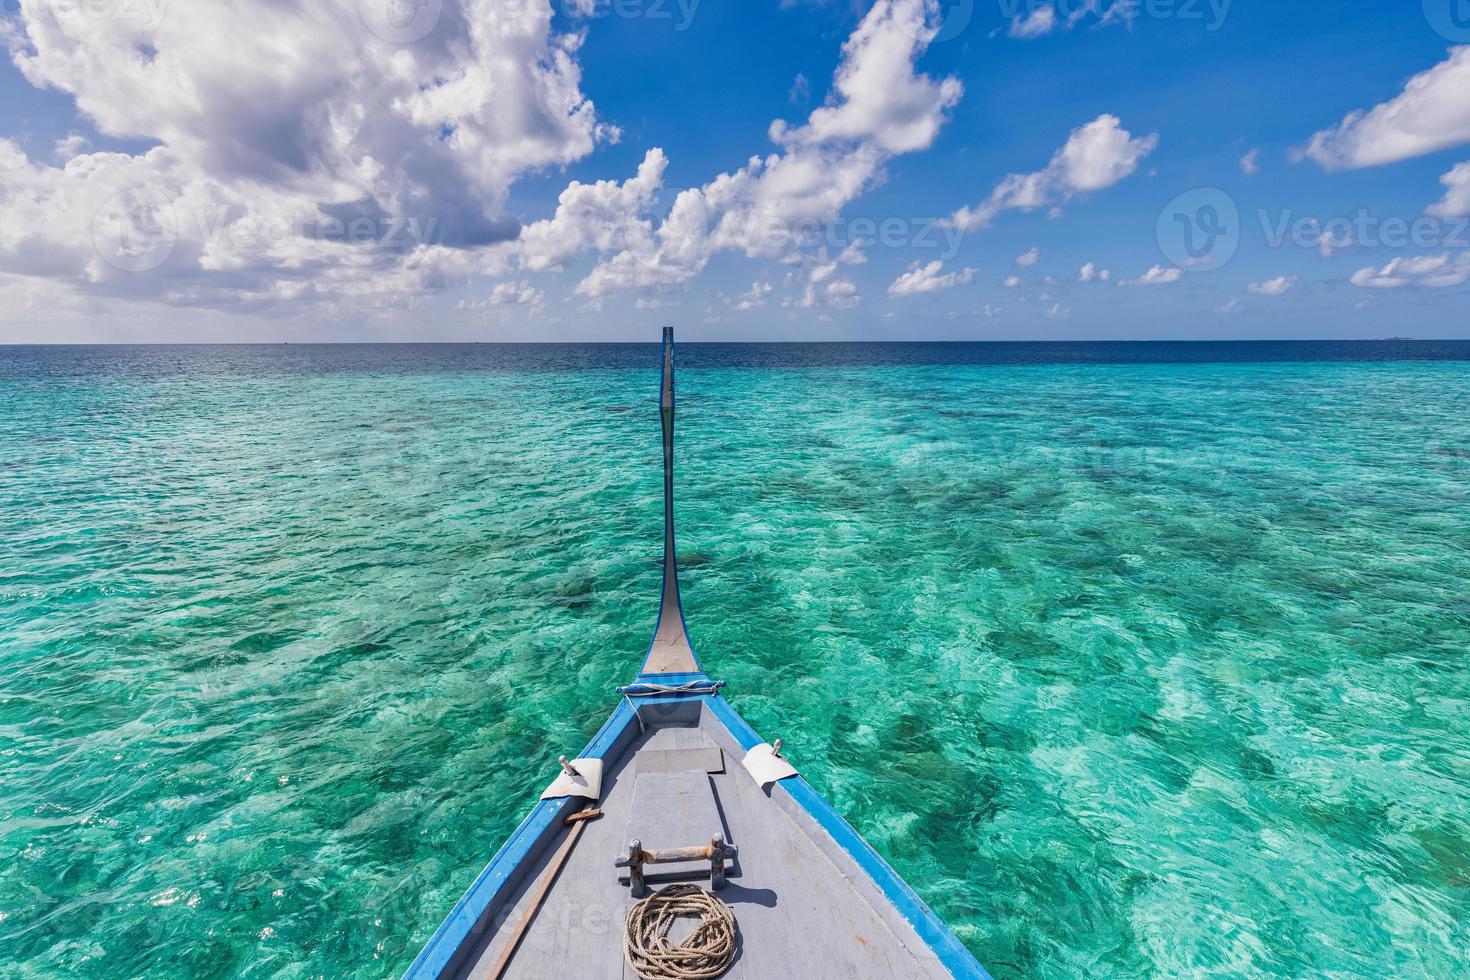 Boat in turquoise ocean water against blue sky with white clouds over tropical lagoon. Natural seascape landscape for summer vacation, panoramic view in Maldives islands. Dhoni boat, exotic travel photo